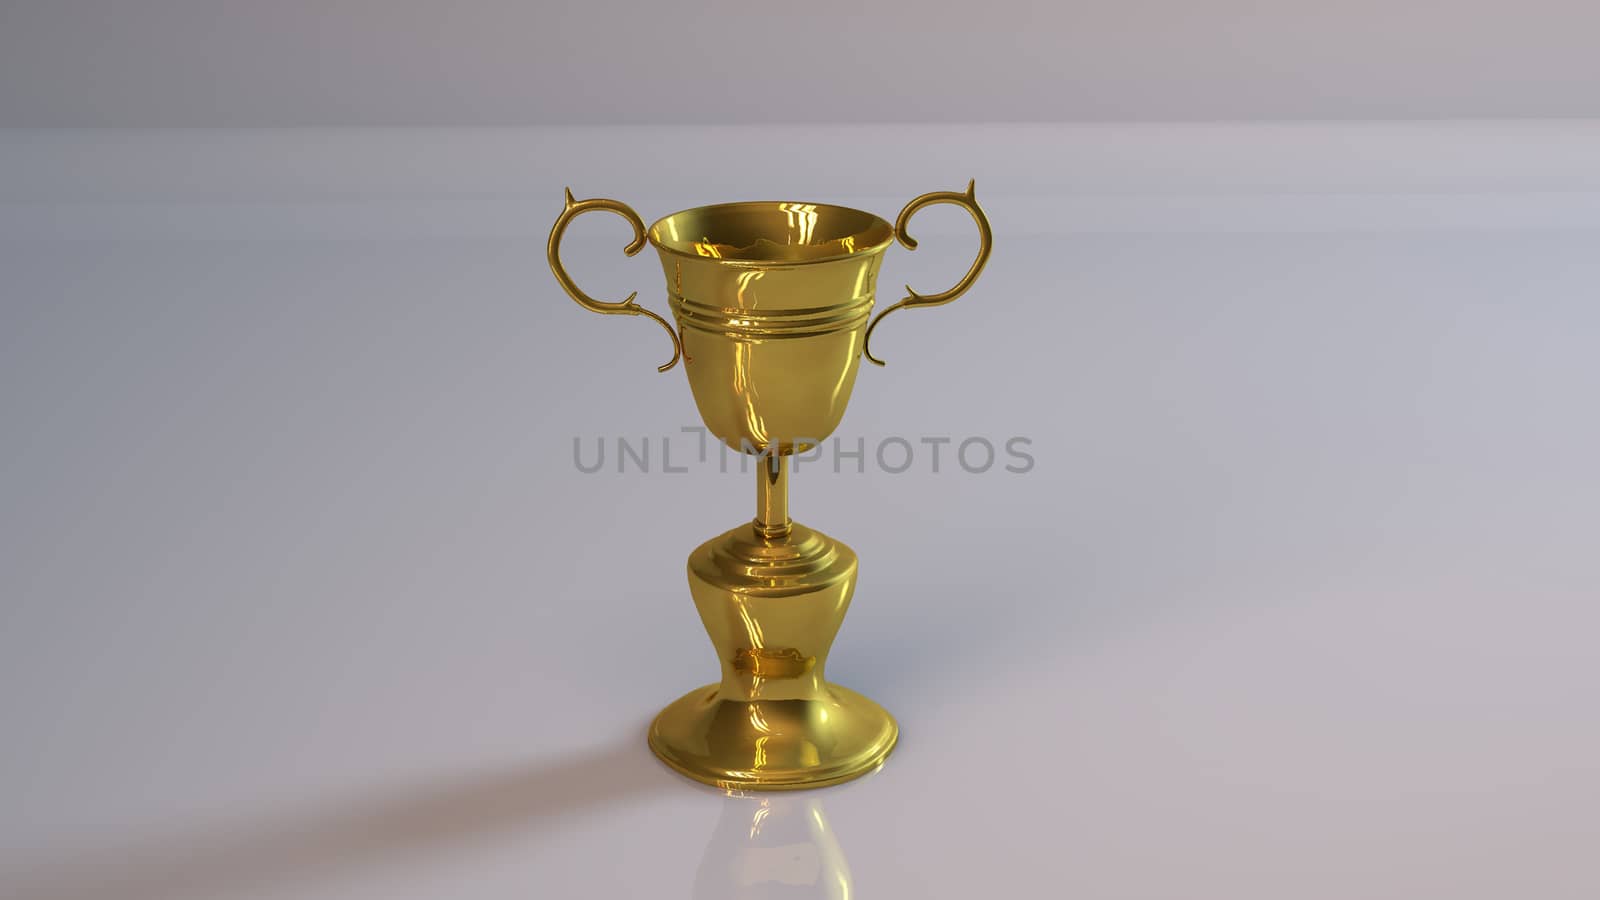 Golden 3D object (world cup) inside a white reflected stage with high render quality to be used as a logo, medal, symbol, shape, emblem, icon, business, geometric, label or any other use